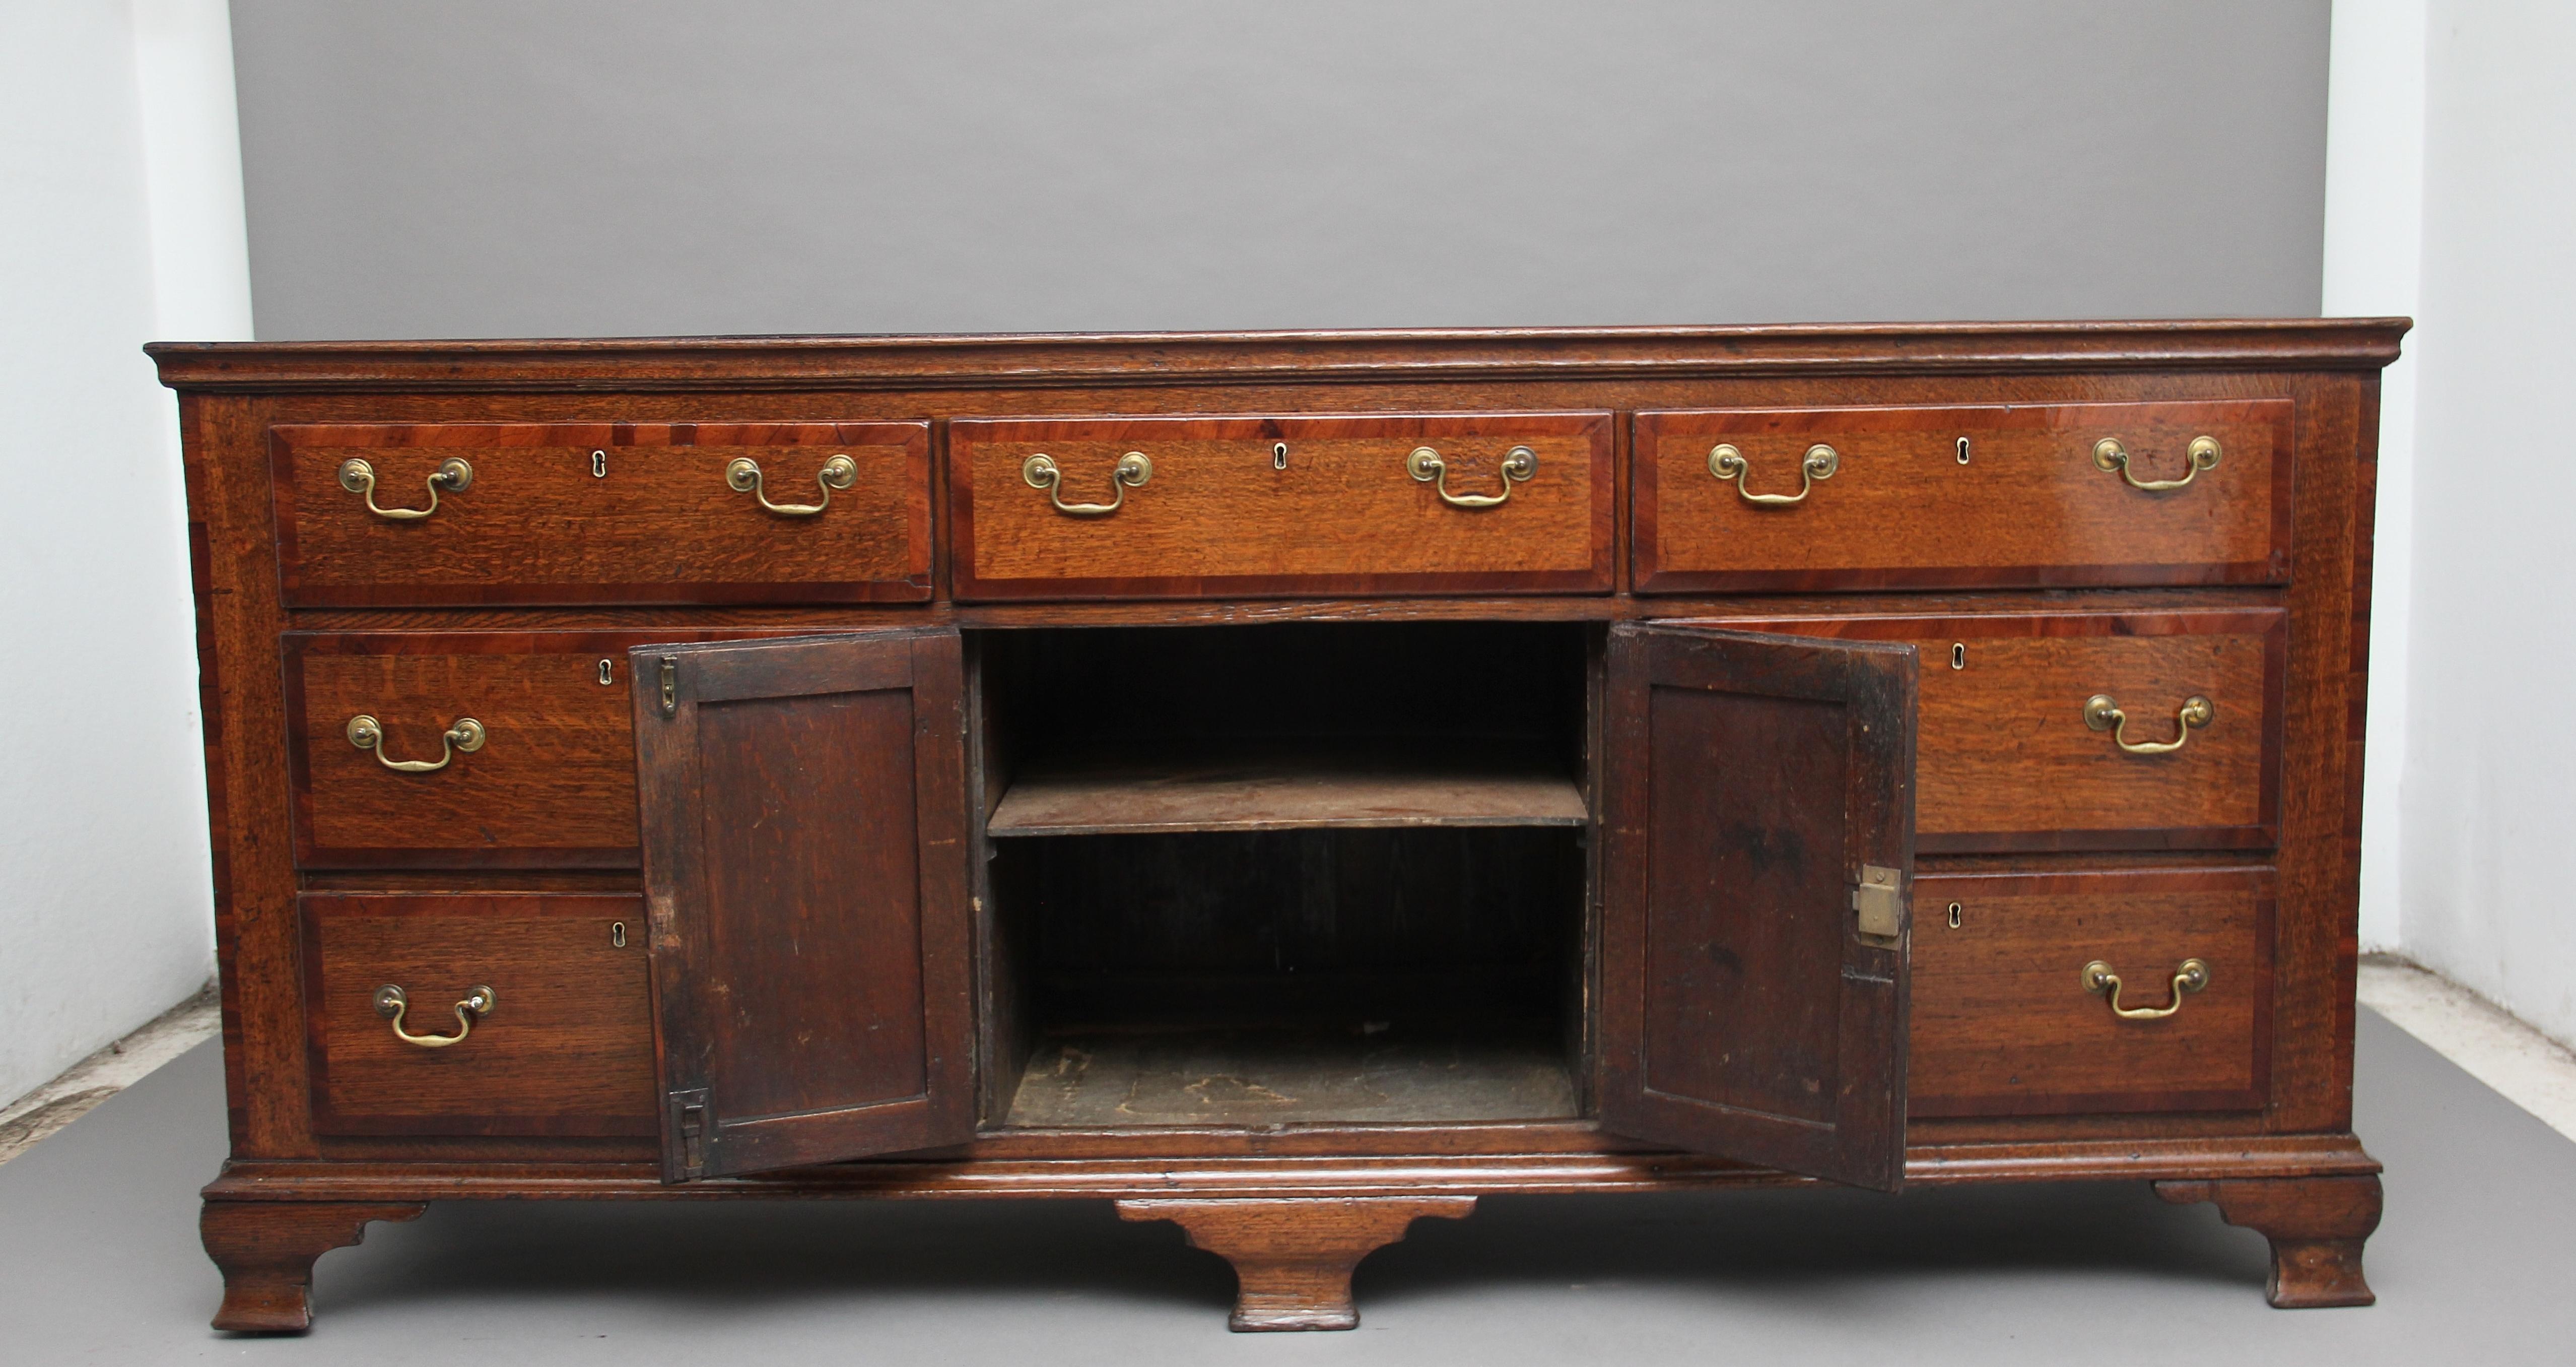 A large 18th century Cheshire oak dresser base, the top crossbanded in mahogany above a selection of seven crossbanded drawers, one drawer at the top centre flanked either side by three graduated drawers, the drawers having brass swan neck handles